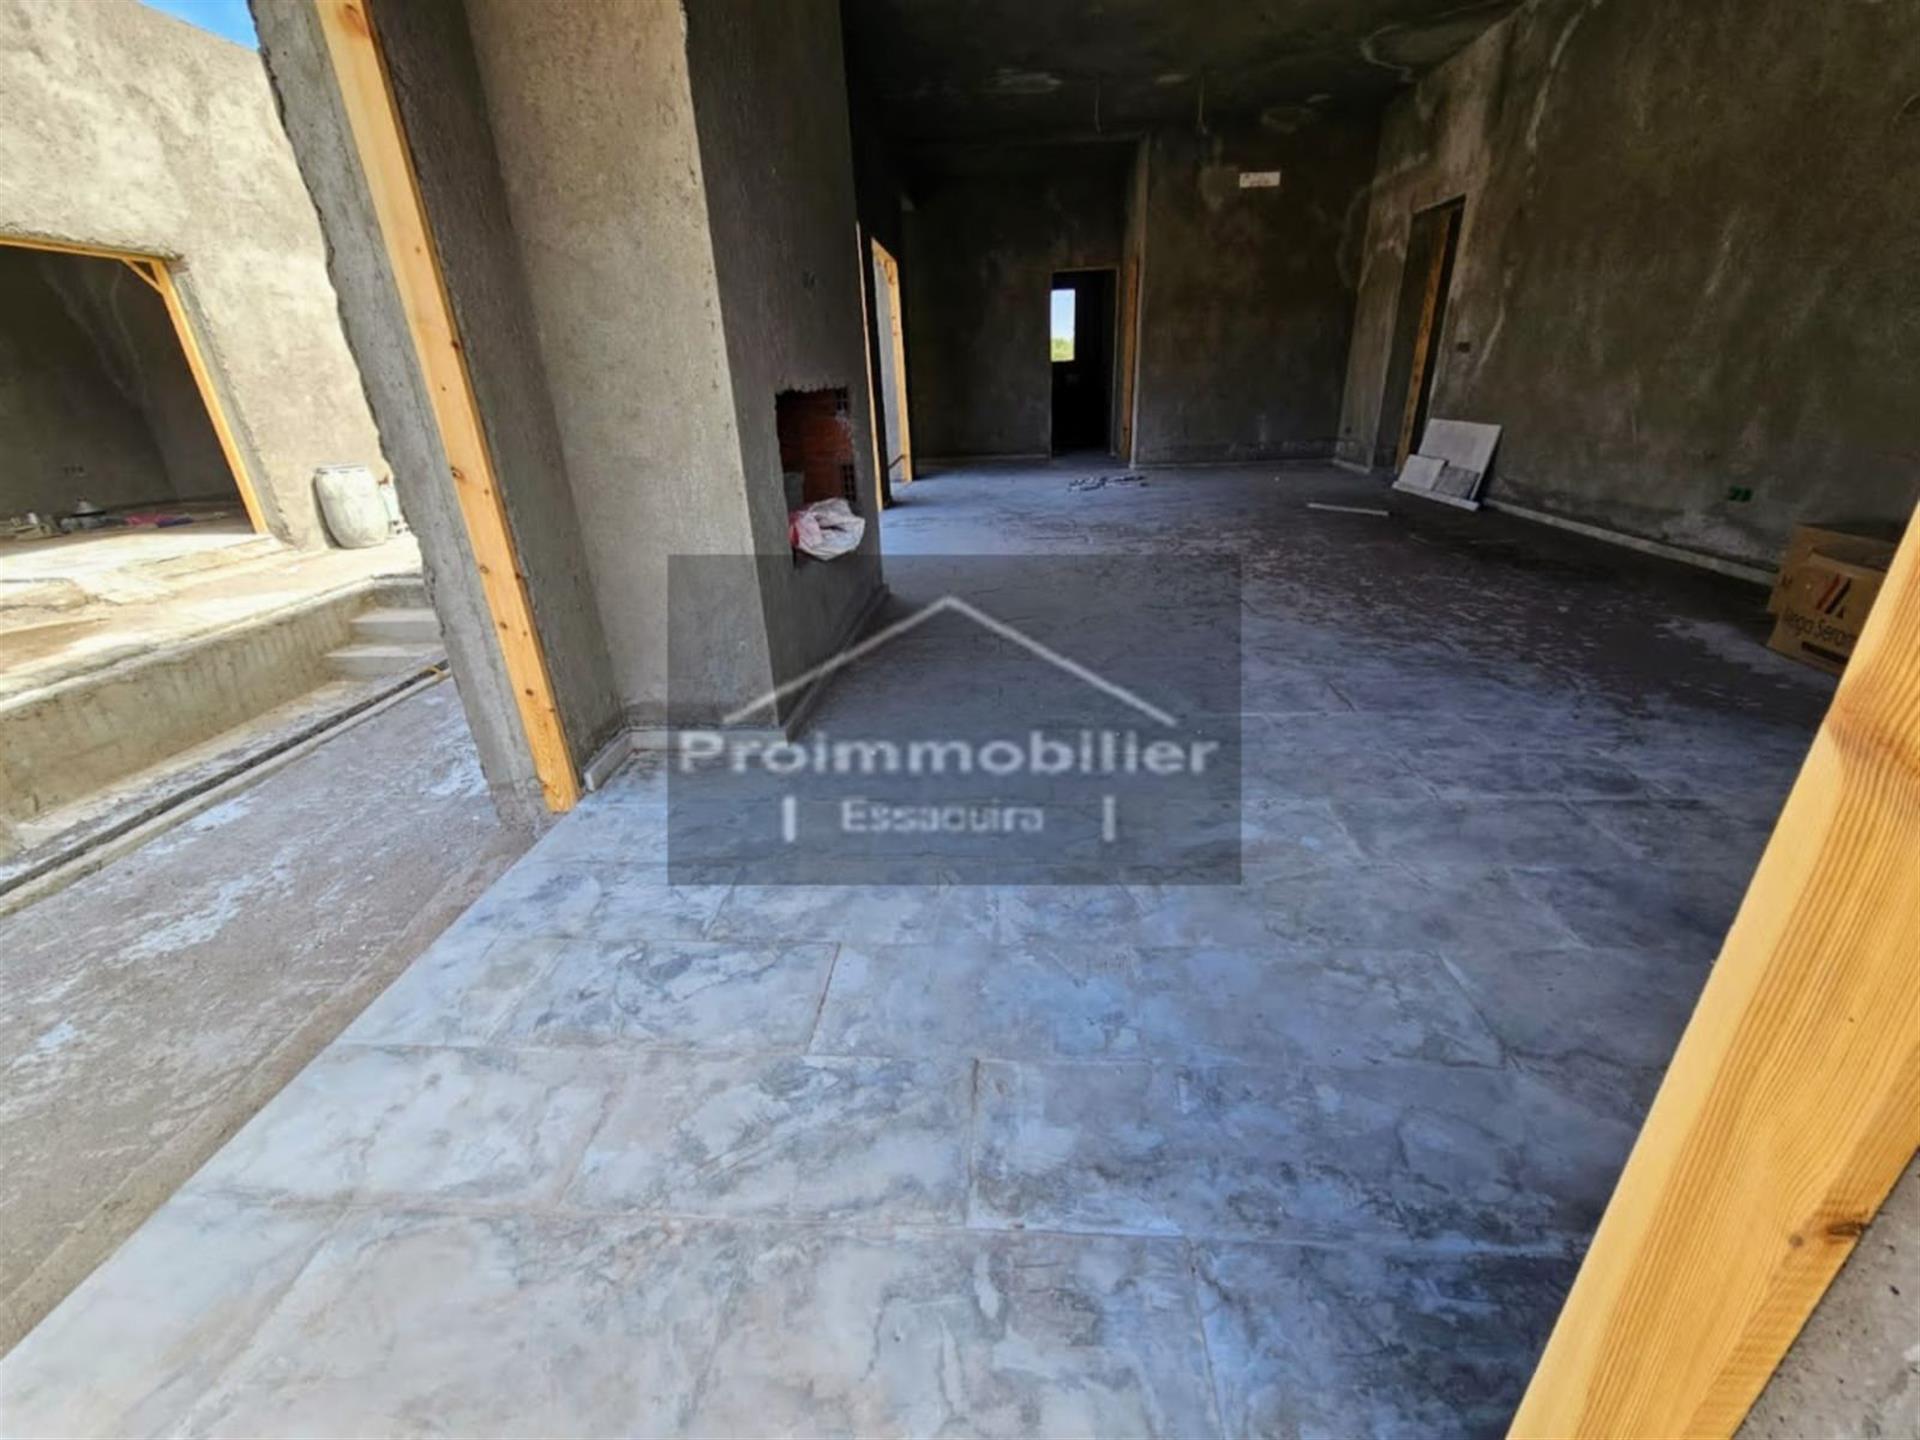 24-05-04-Vv Amazing New Villa under construction for sale in Essaouira of 190m² Land 1230 m²